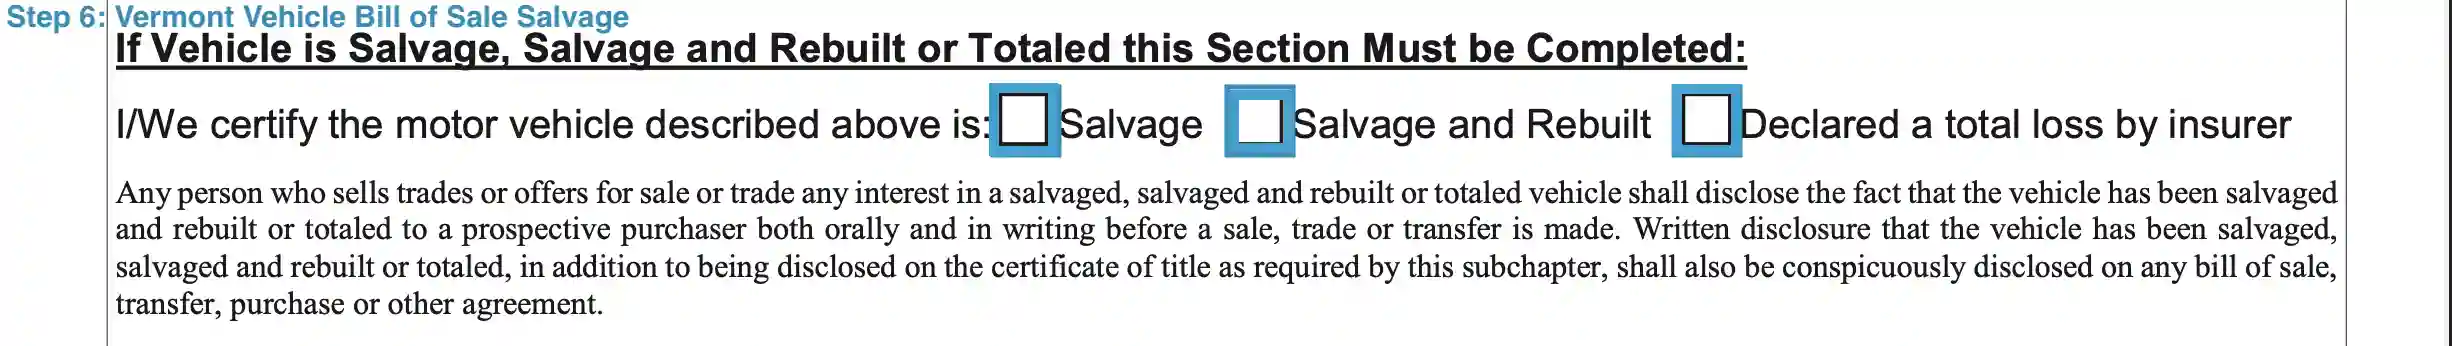 Step 6 to filling out a vermont vehicle bill of sale salvage